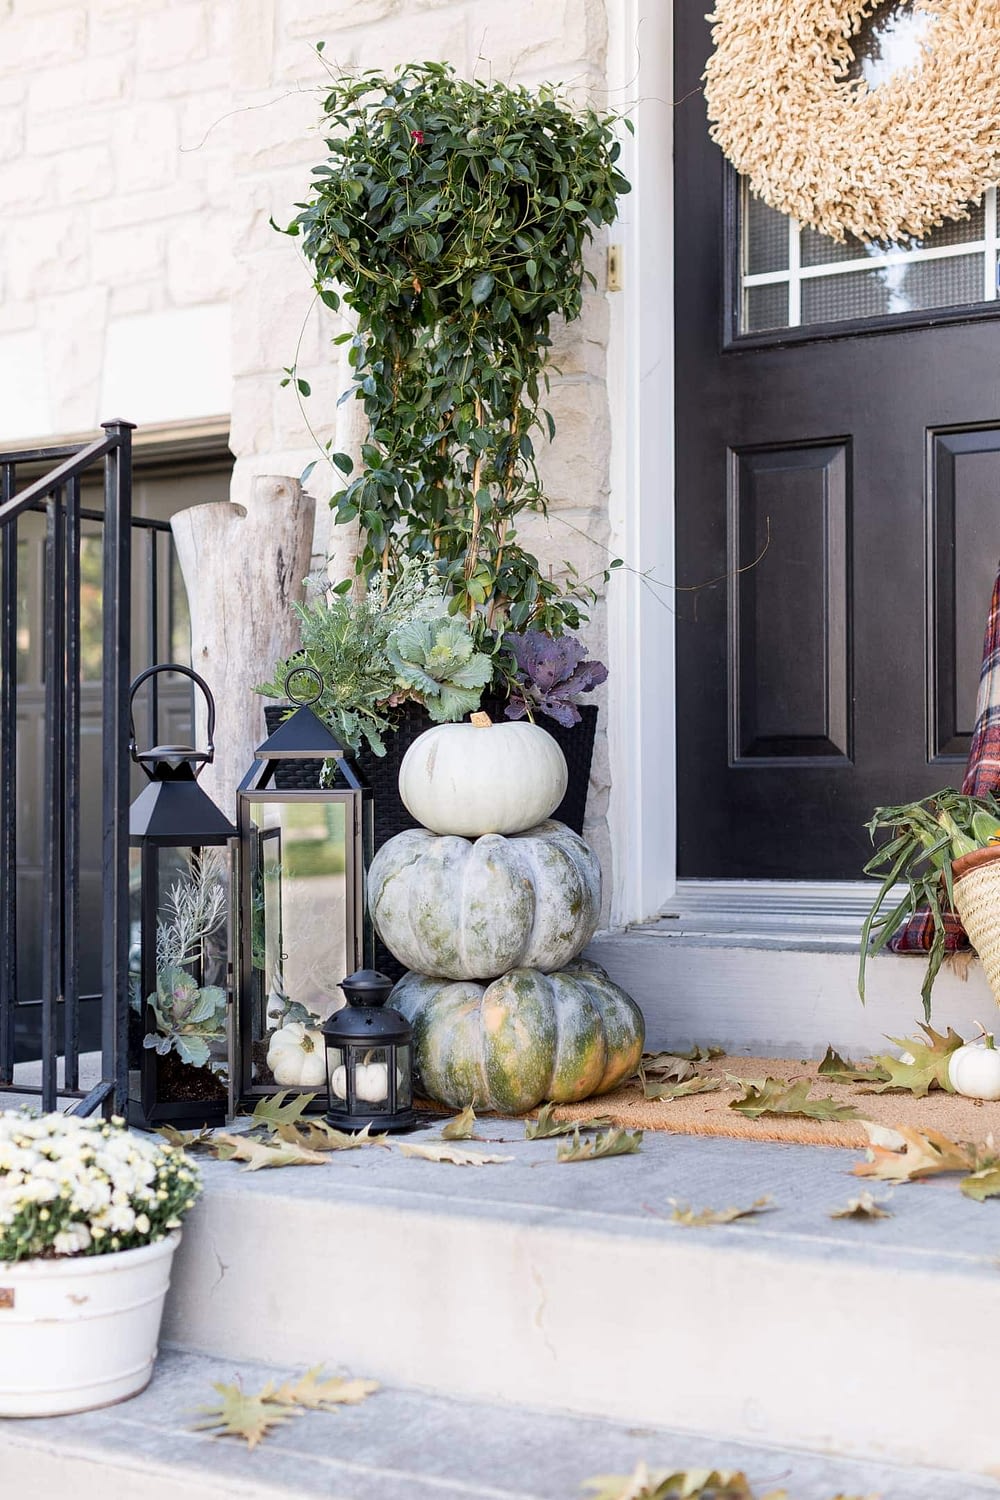 Fall front porch ideas using black lanterns and stacked pumpkins